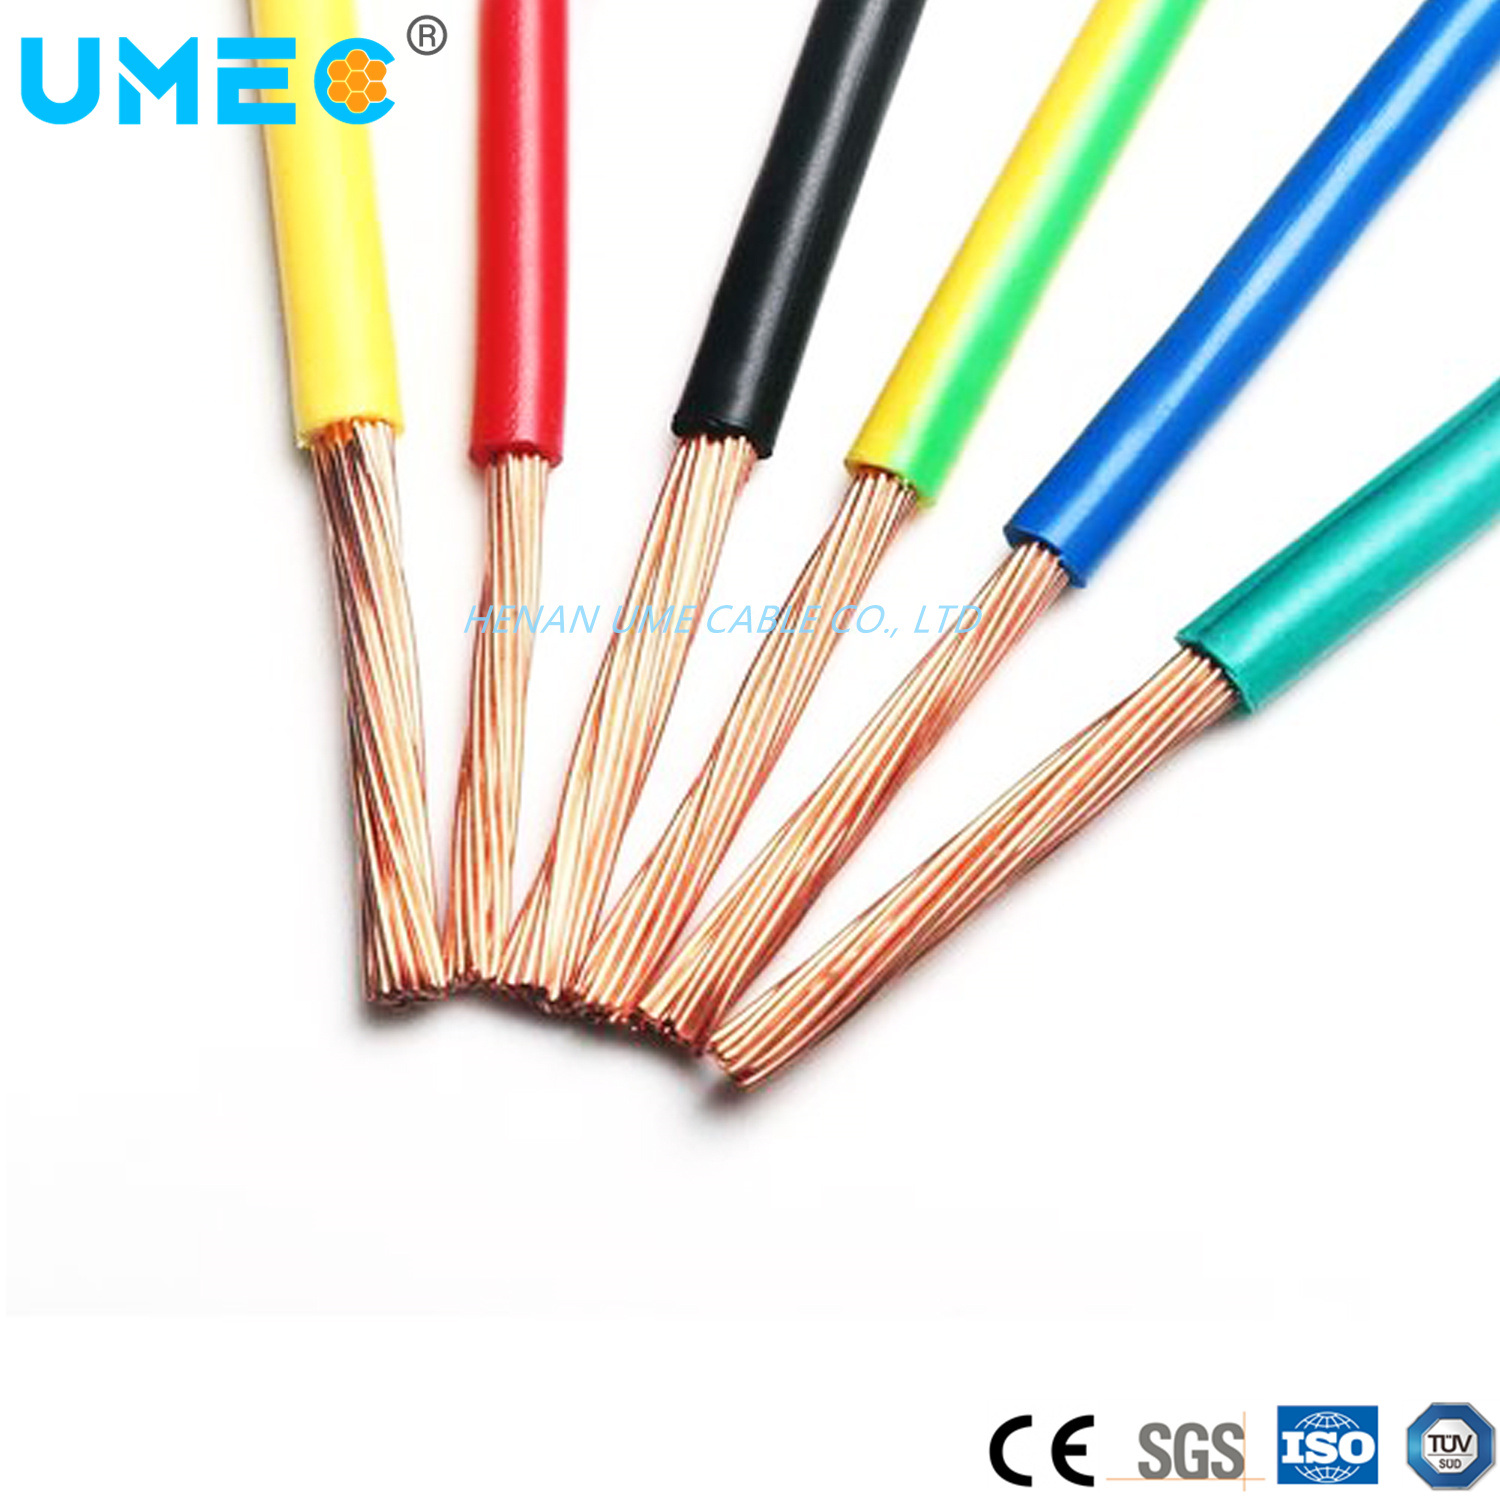 Low Voltage 300/500V 450/750V H05V-F H0V-F Nyaf 1X1.5mm2 2.5mm2 4mm2 6mm2 PVC Insulated Wire